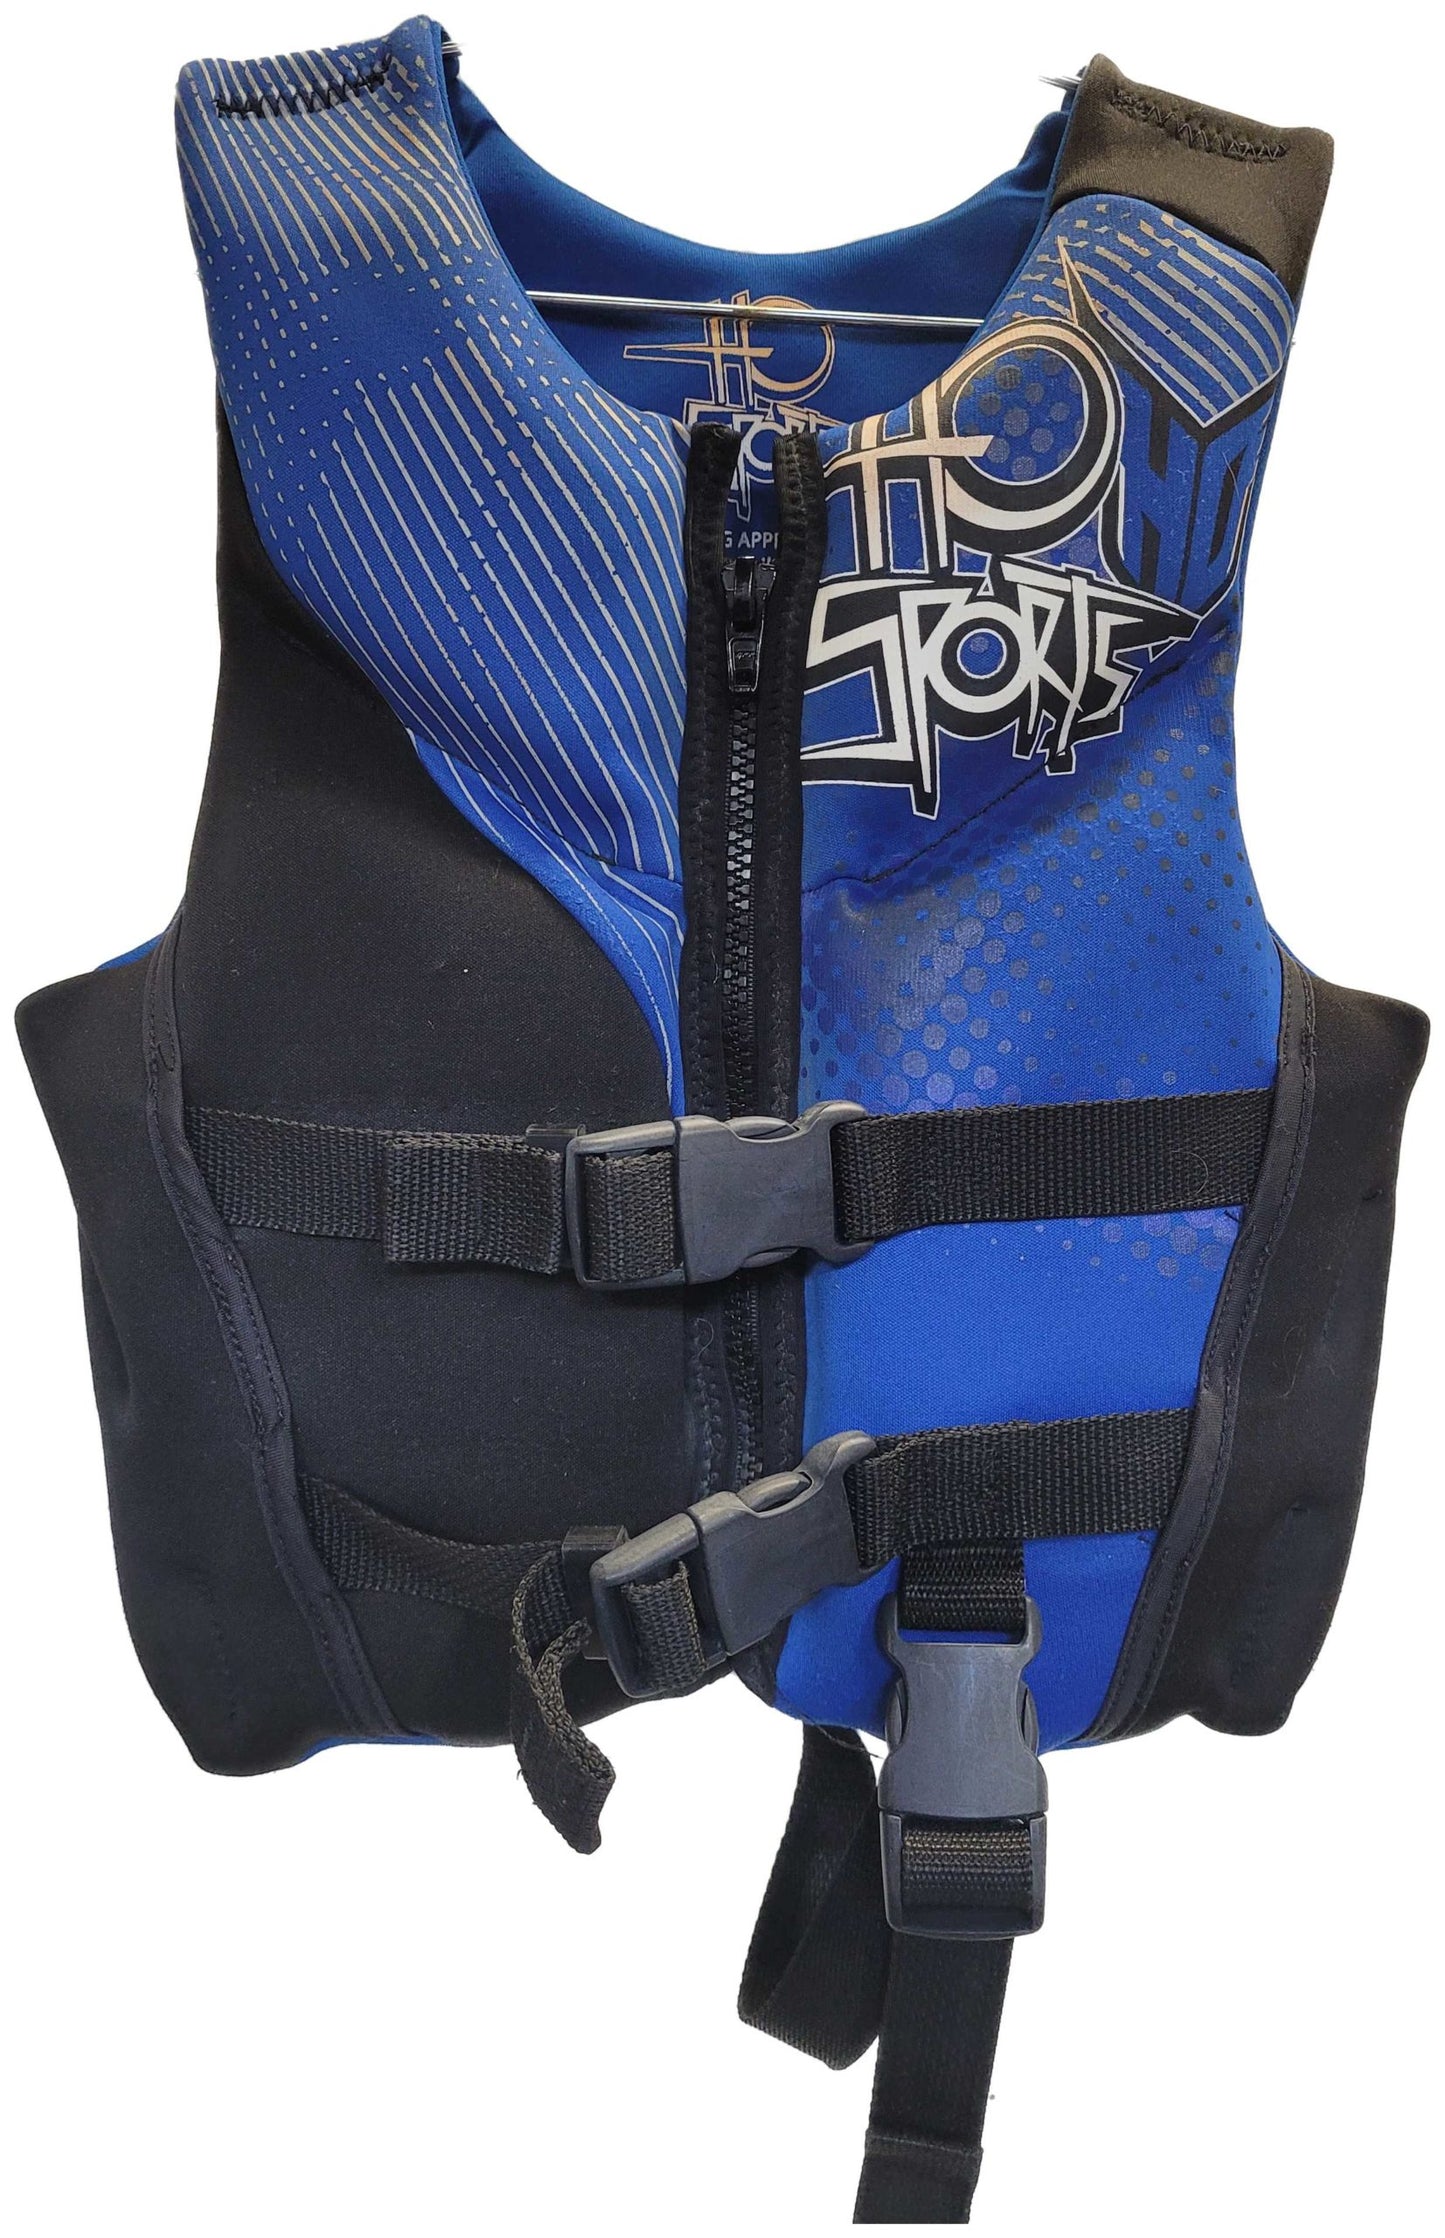 HO Sports Youth Waterports Life Vest, 30-50lbs